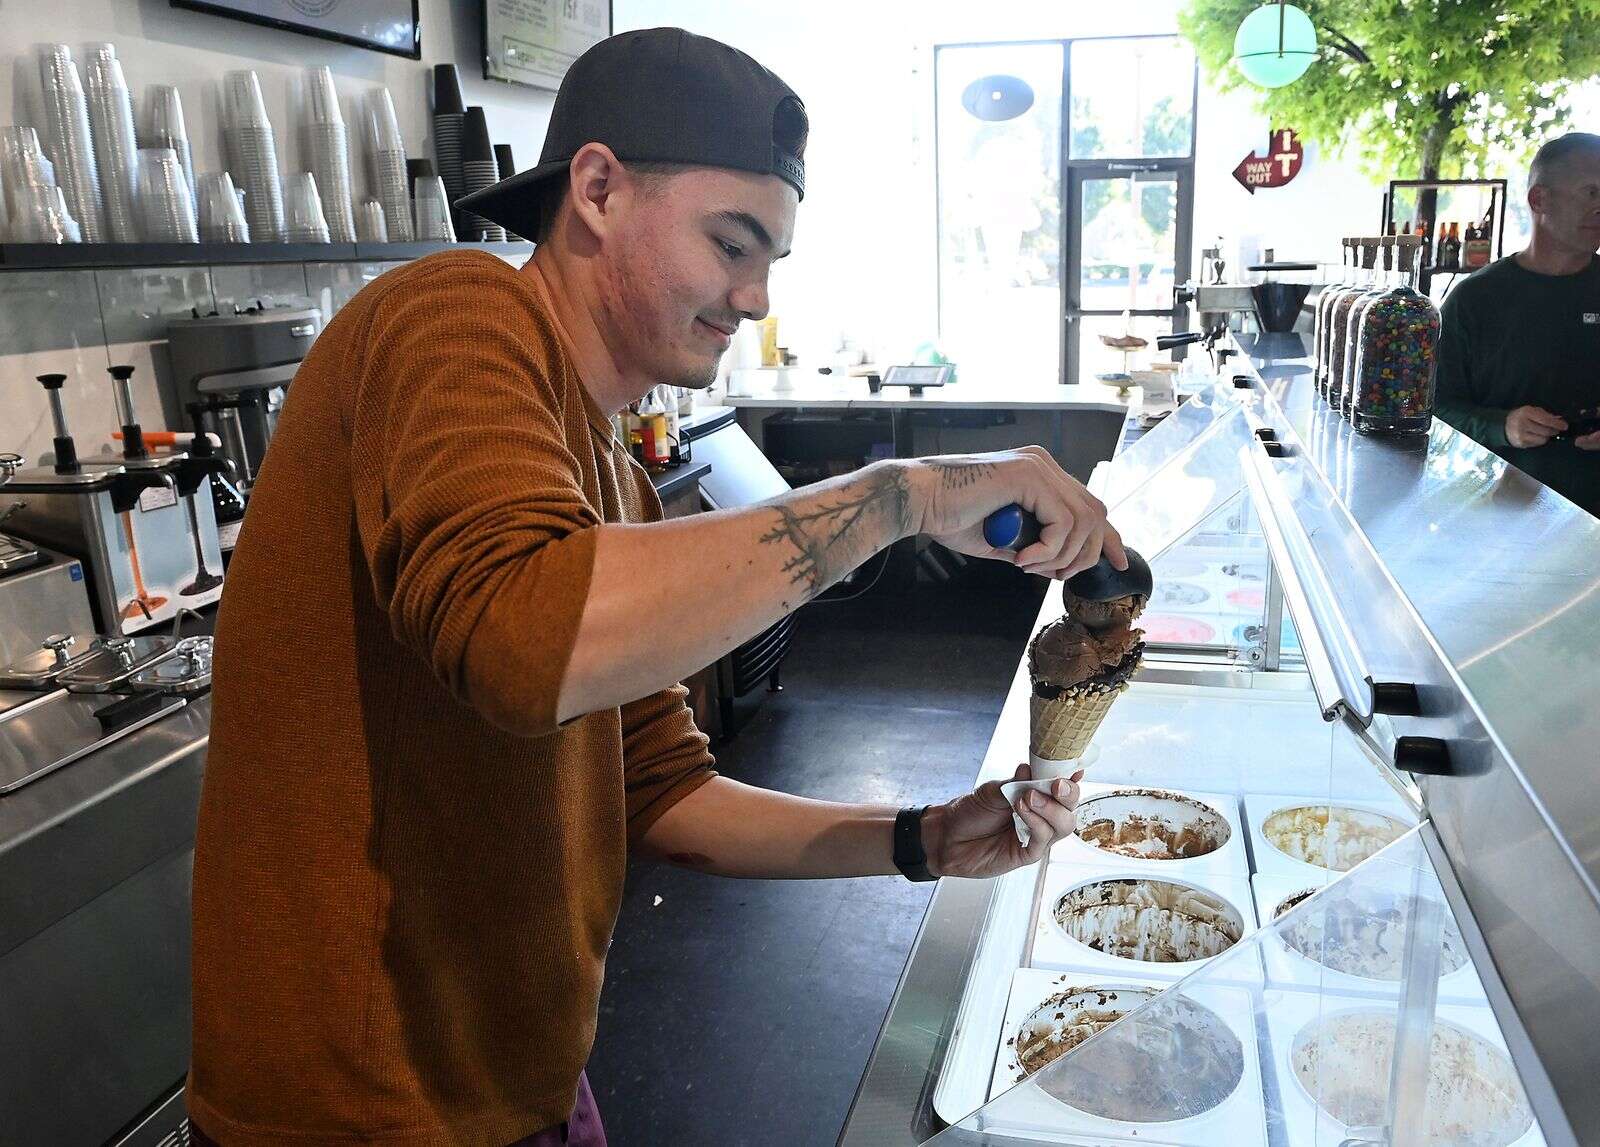 J’ville ice cream shop expands to Medford – Medford News, Weather, Sports, Breaking News